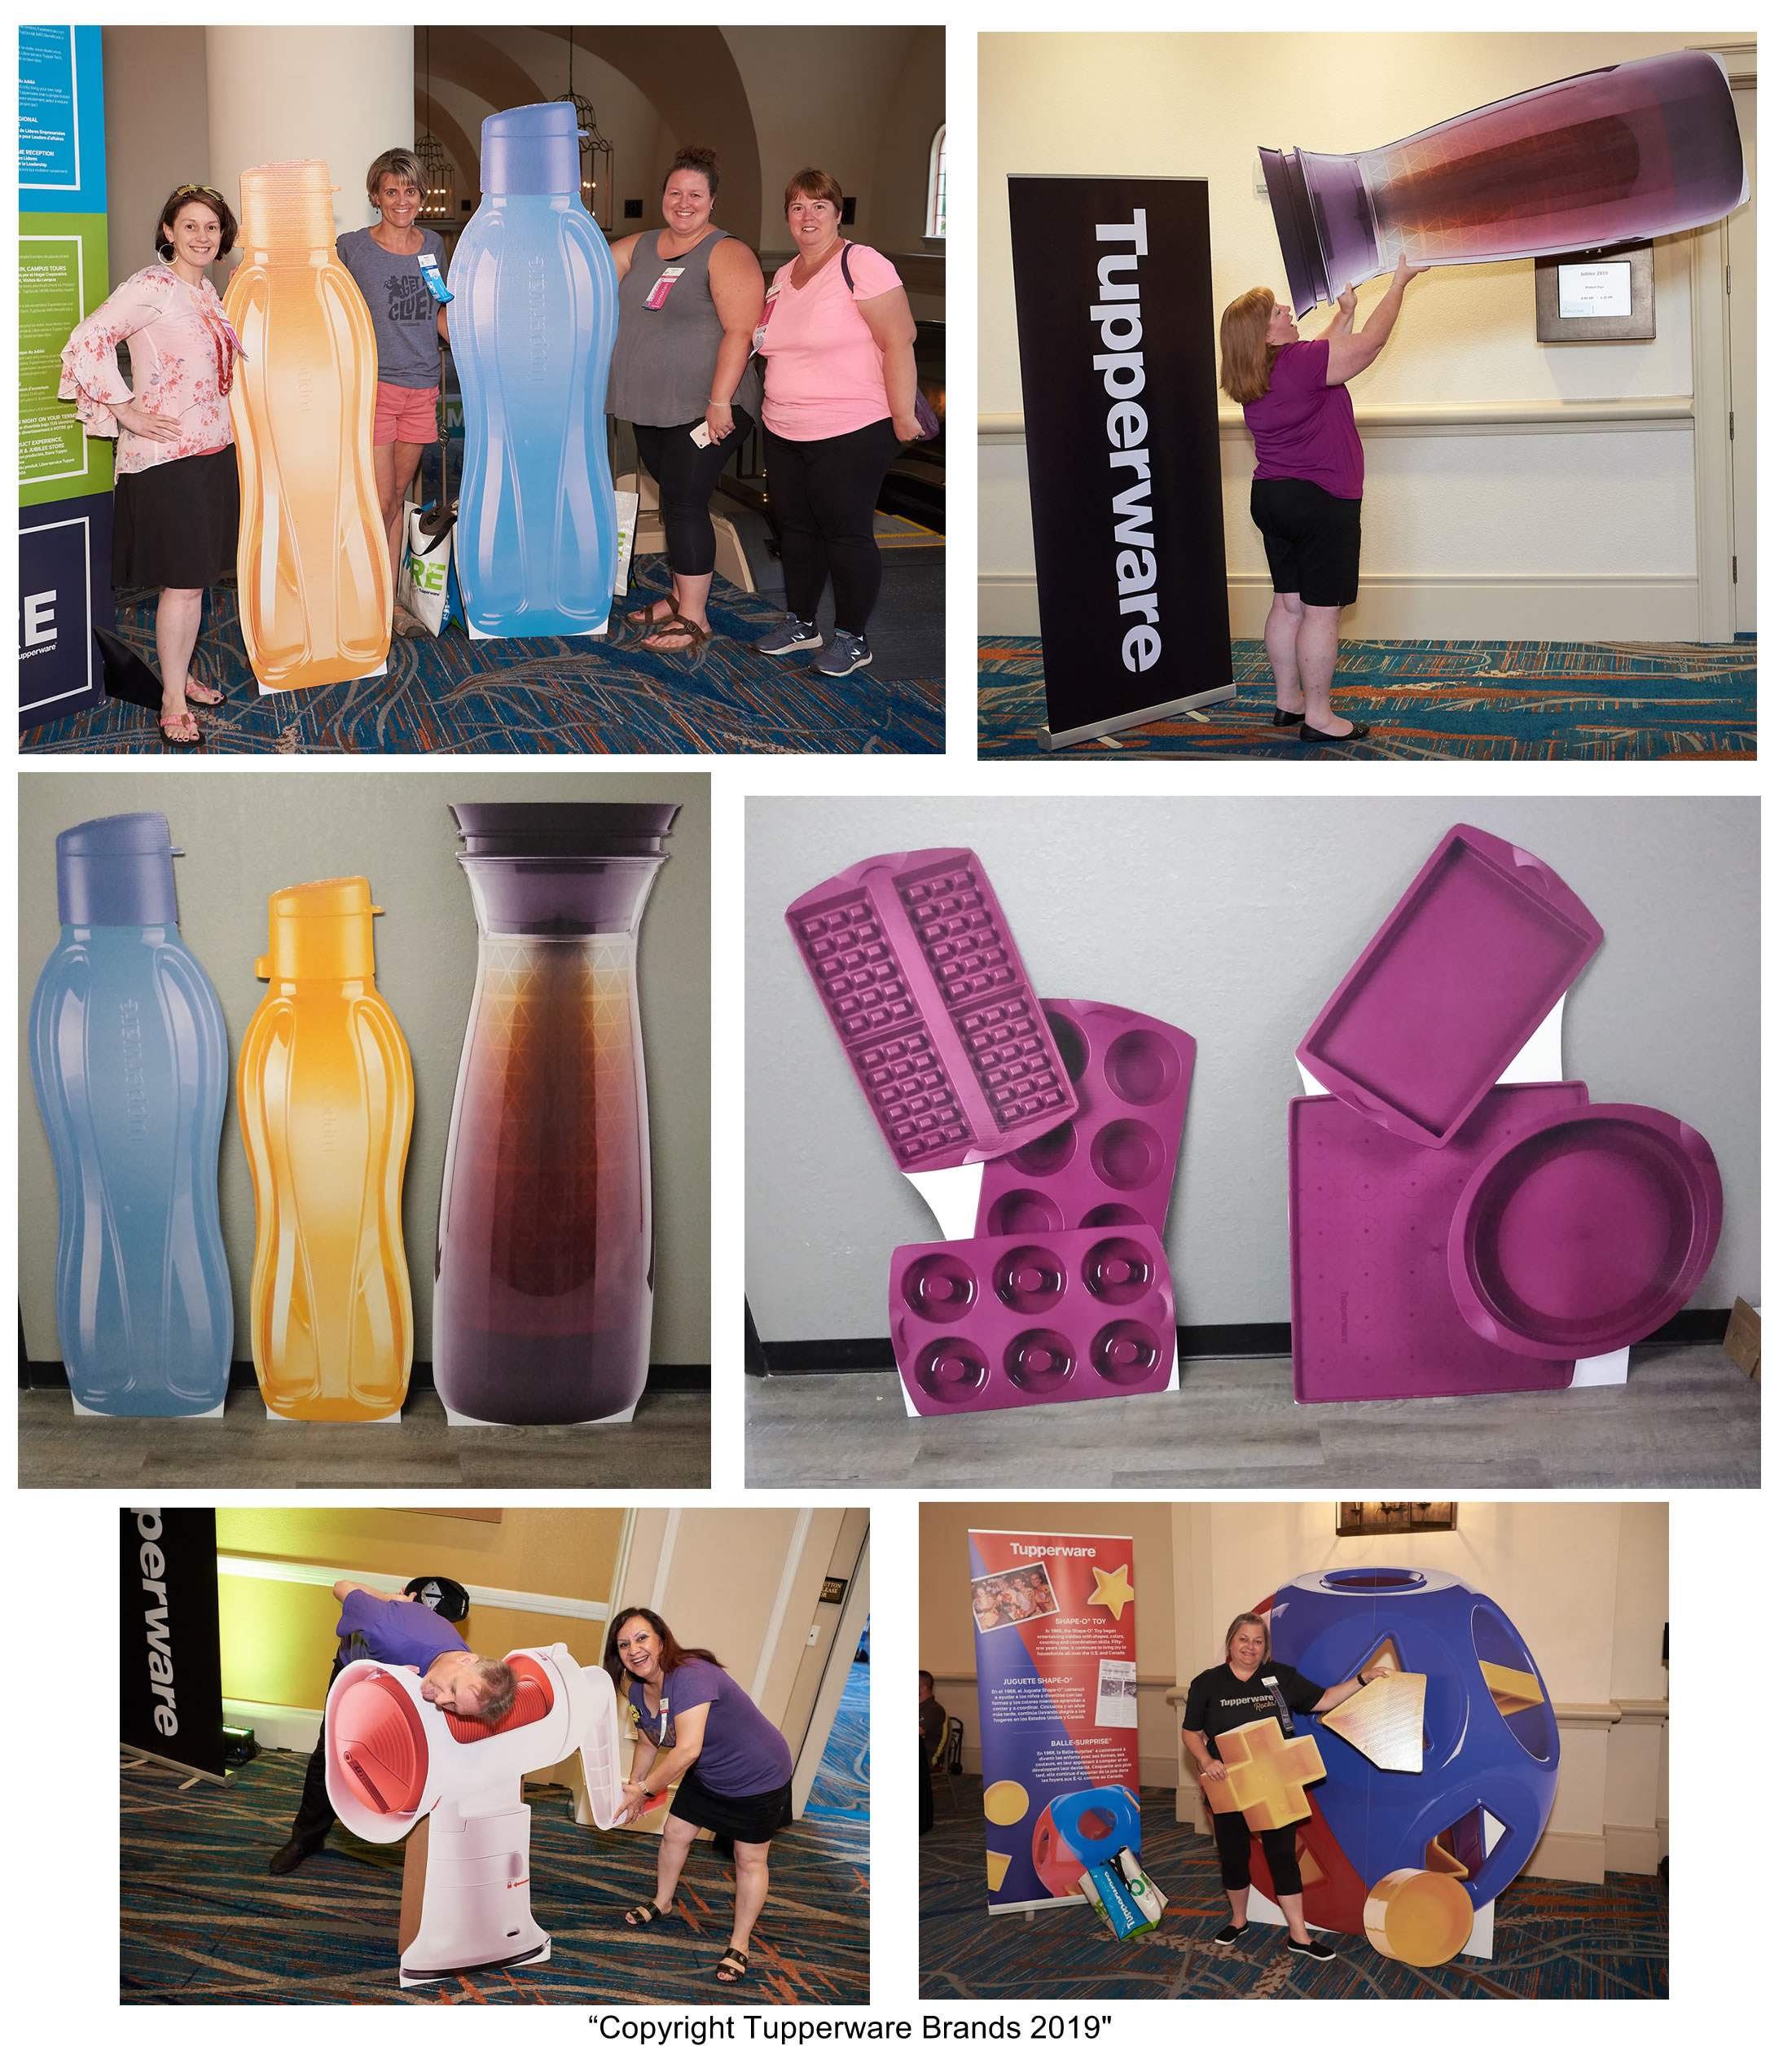 Tupperware Custom Cardboard Cutout Standups for Tradeshows and Events